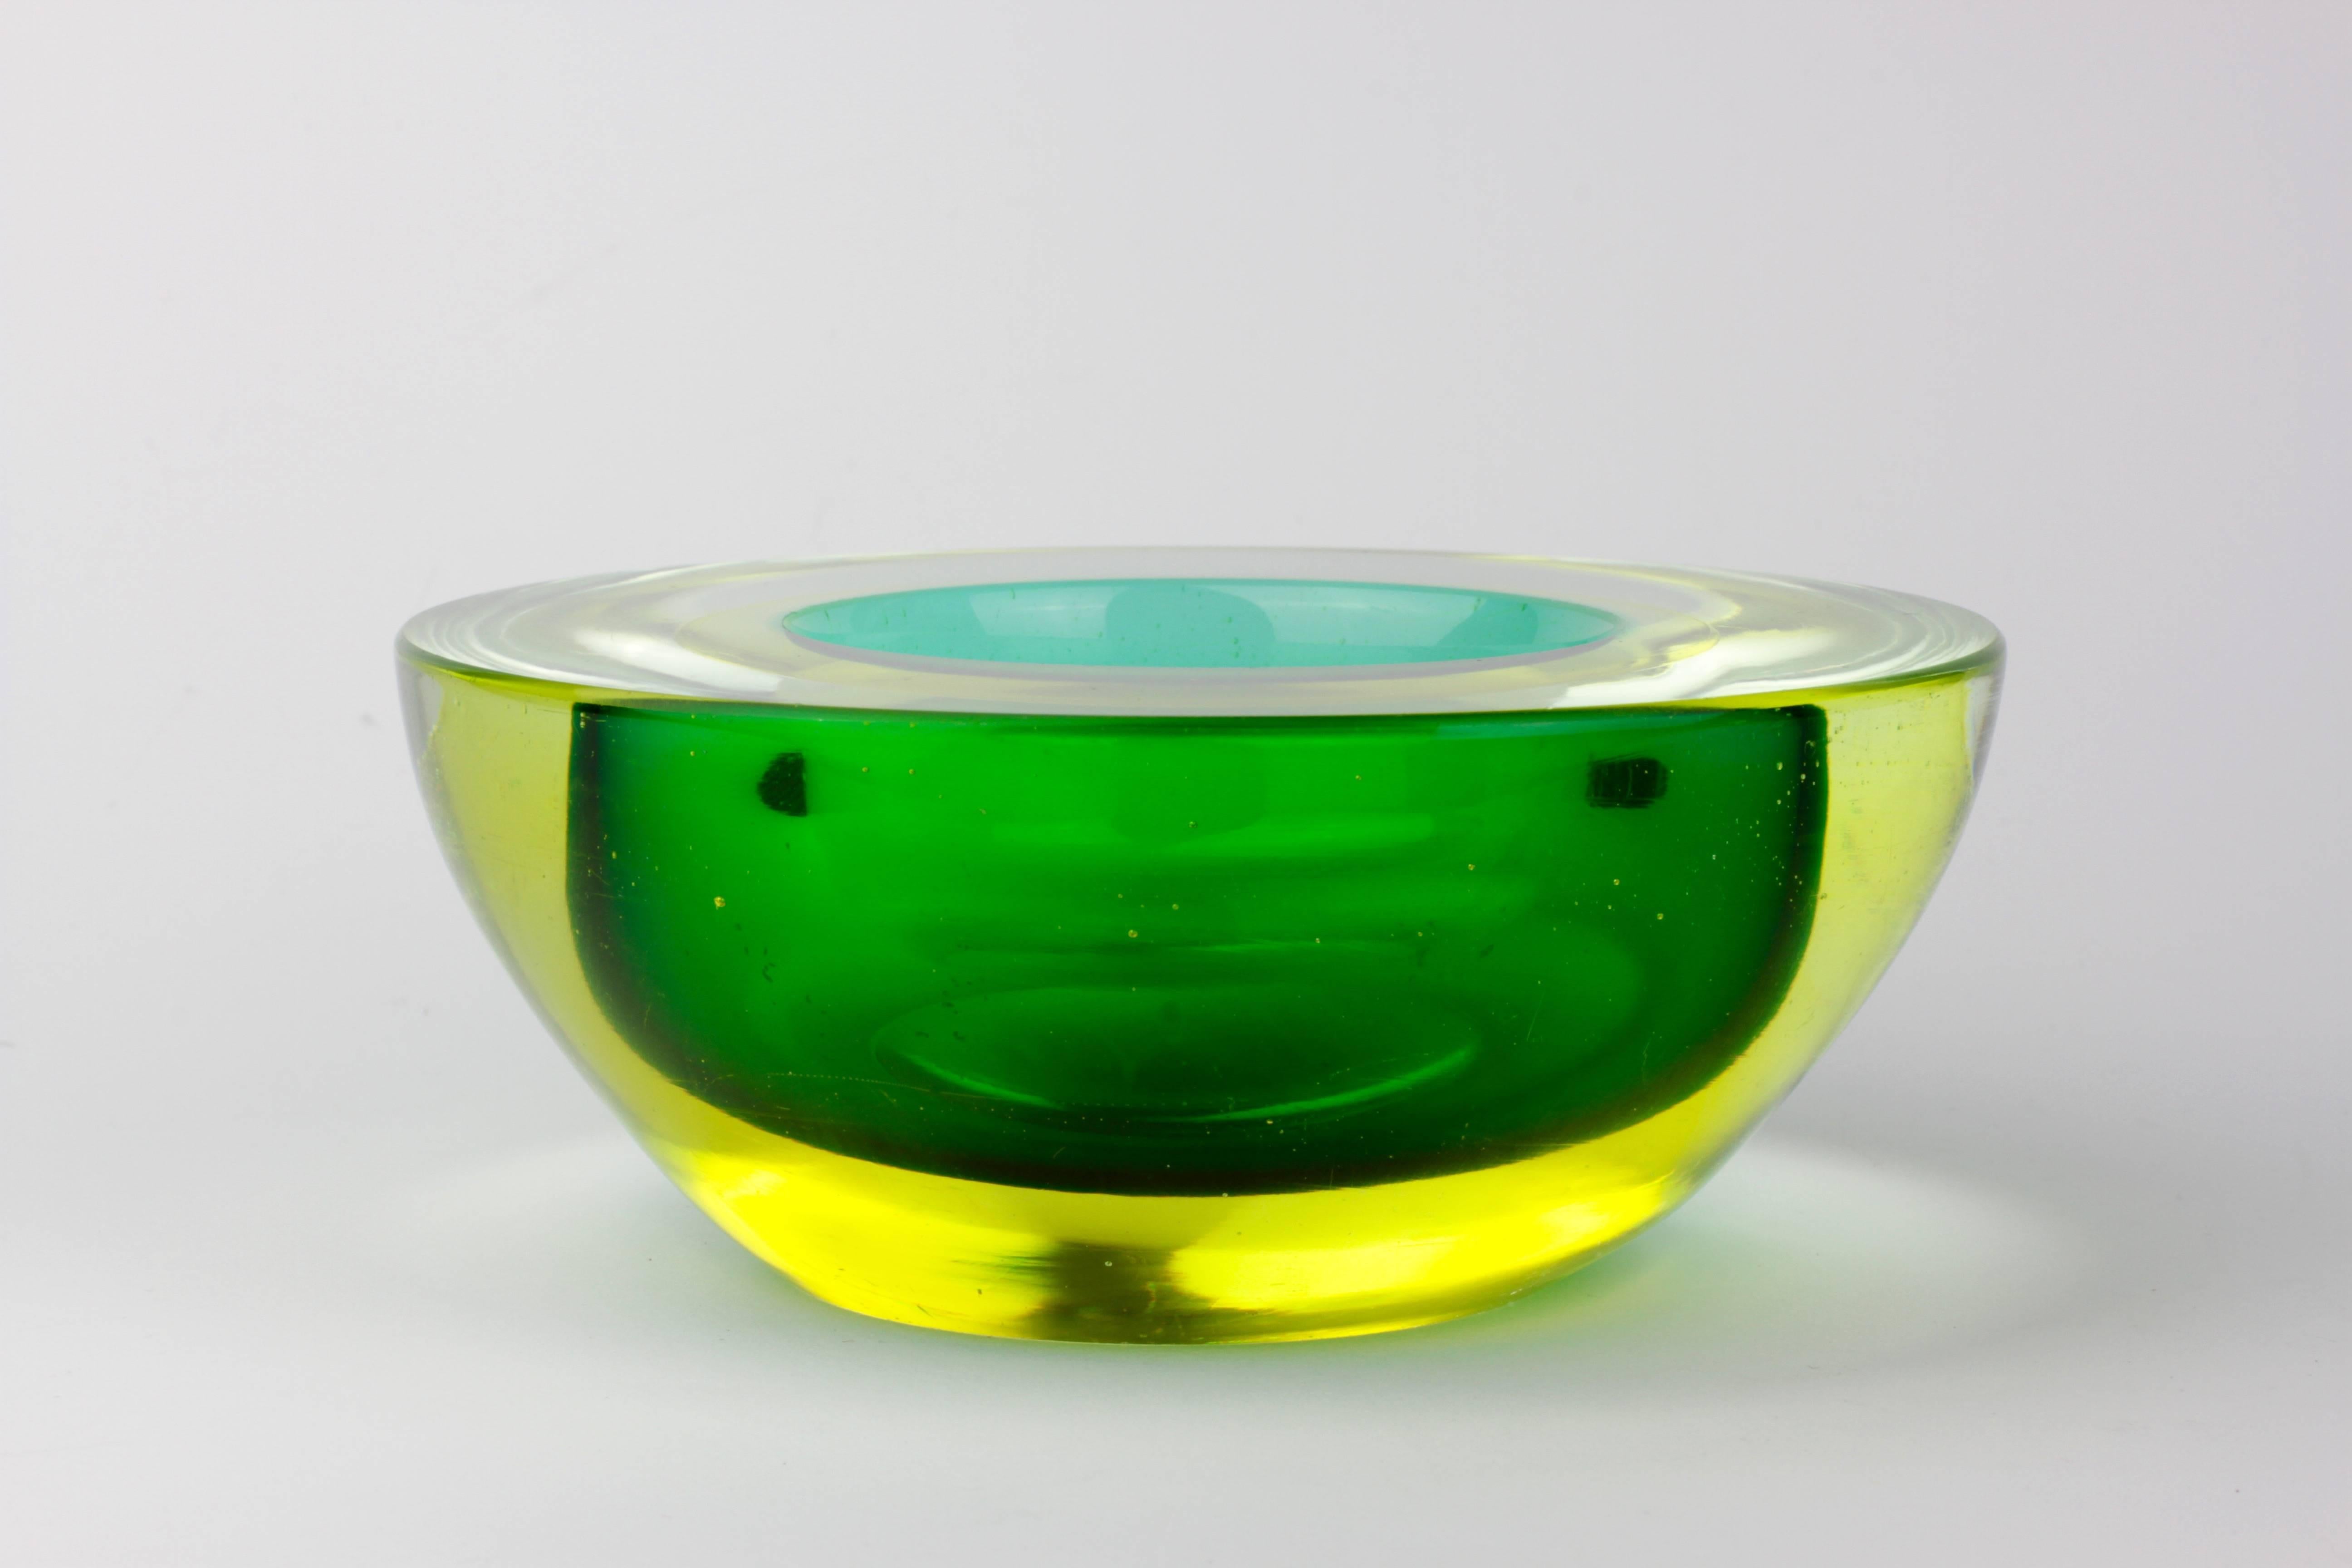 A beautiful and rare bowl by master Murano glass maker Archimede Seguso, circa 1960. We have never seen this combination of colours before - the neon yellow over emerald green over turquoise is understated and elegantly simple resulting is a simply